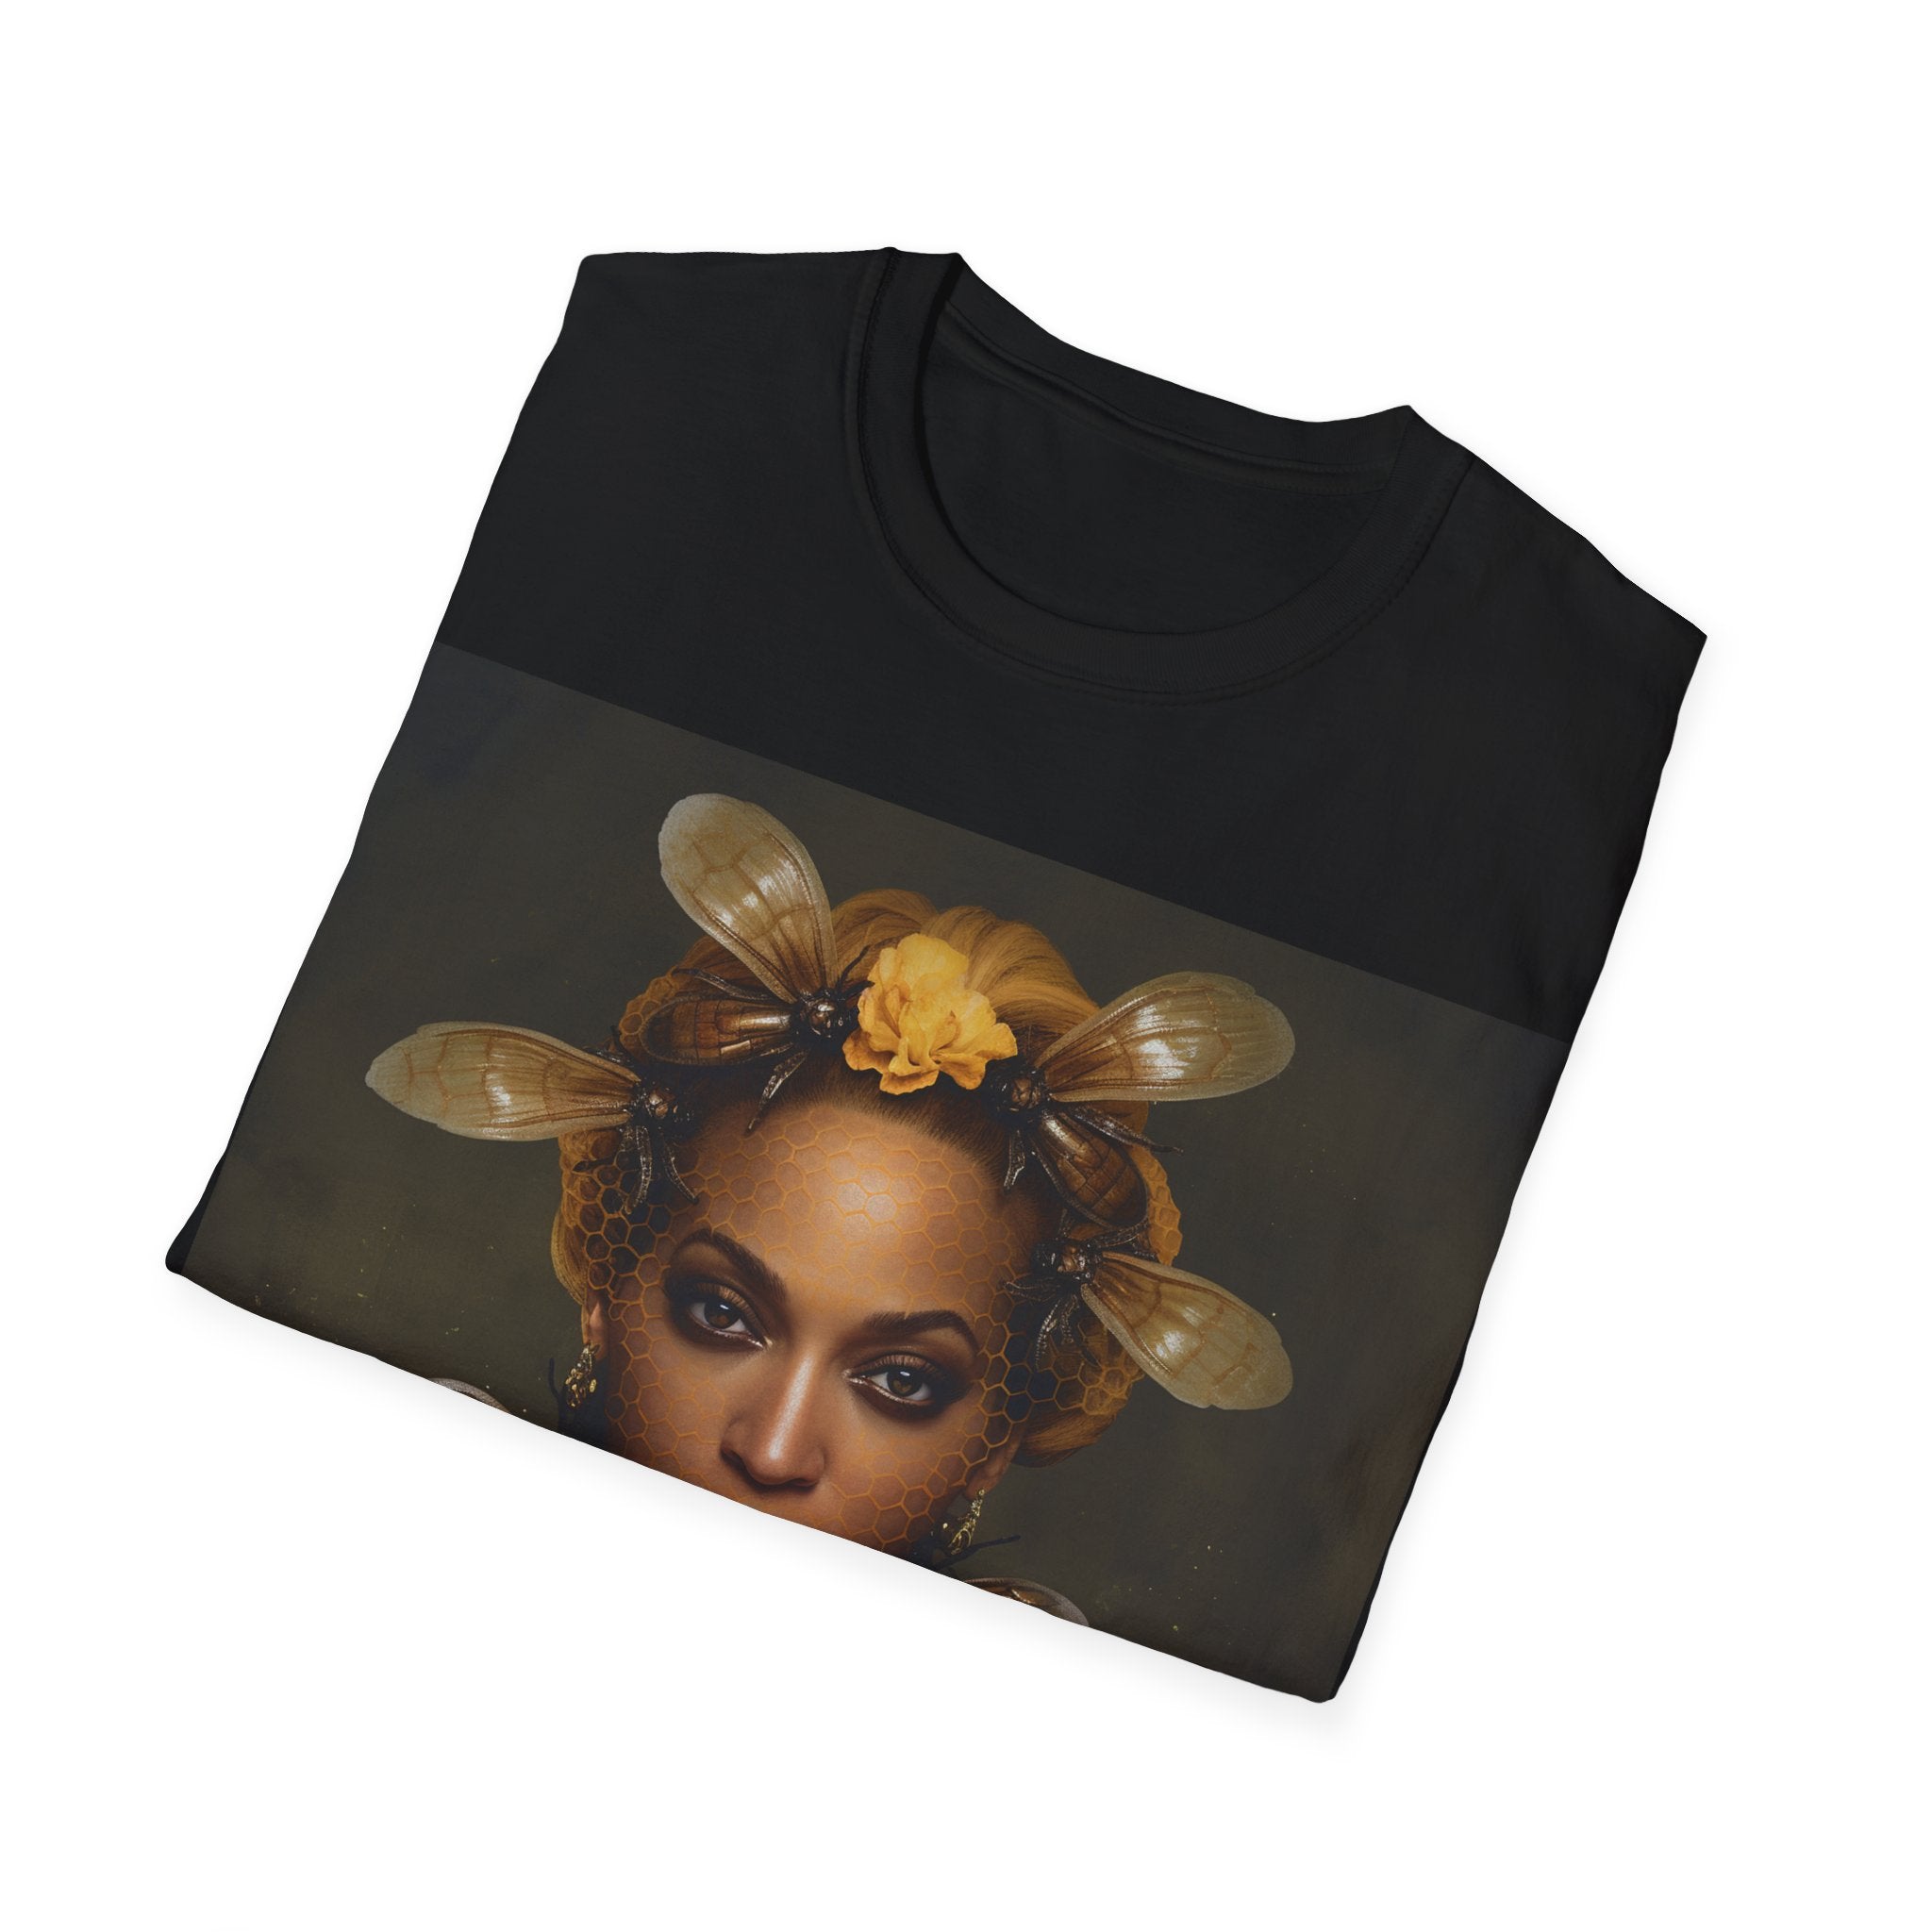 This image showcases a stylish, softstyle unisex t-shirt featuring a unique design inspired by Beyoncé. The t-shirt is displayed in a flattering cut, emphasizing its high-quality fabric and the vibrant tribute artwork that celebrates the music icon's legacy.